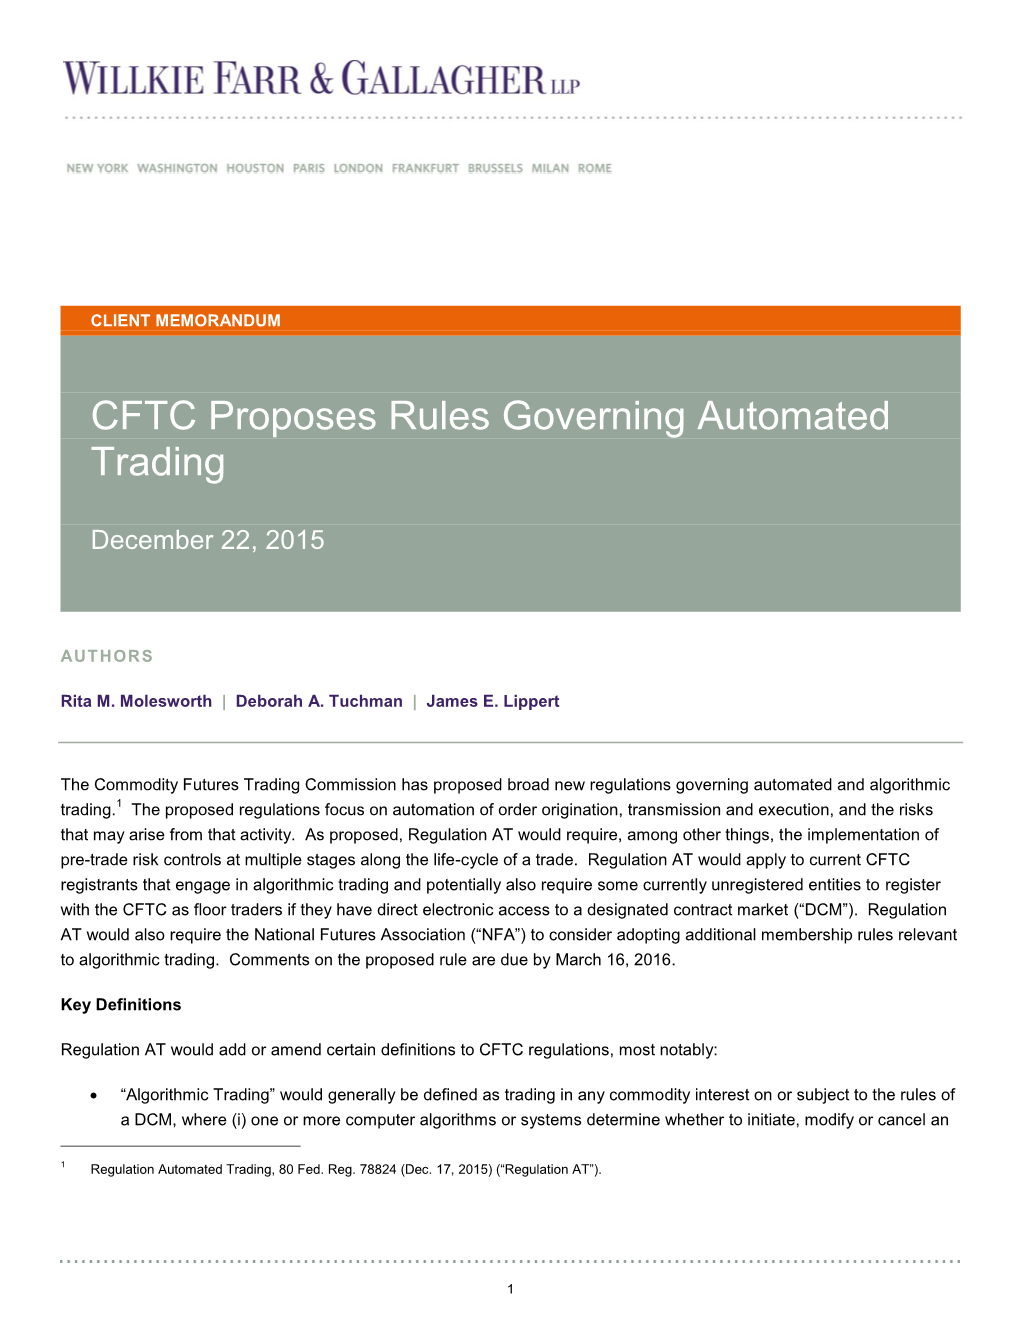 CFTC Proposes Rules Governing Automated Trading